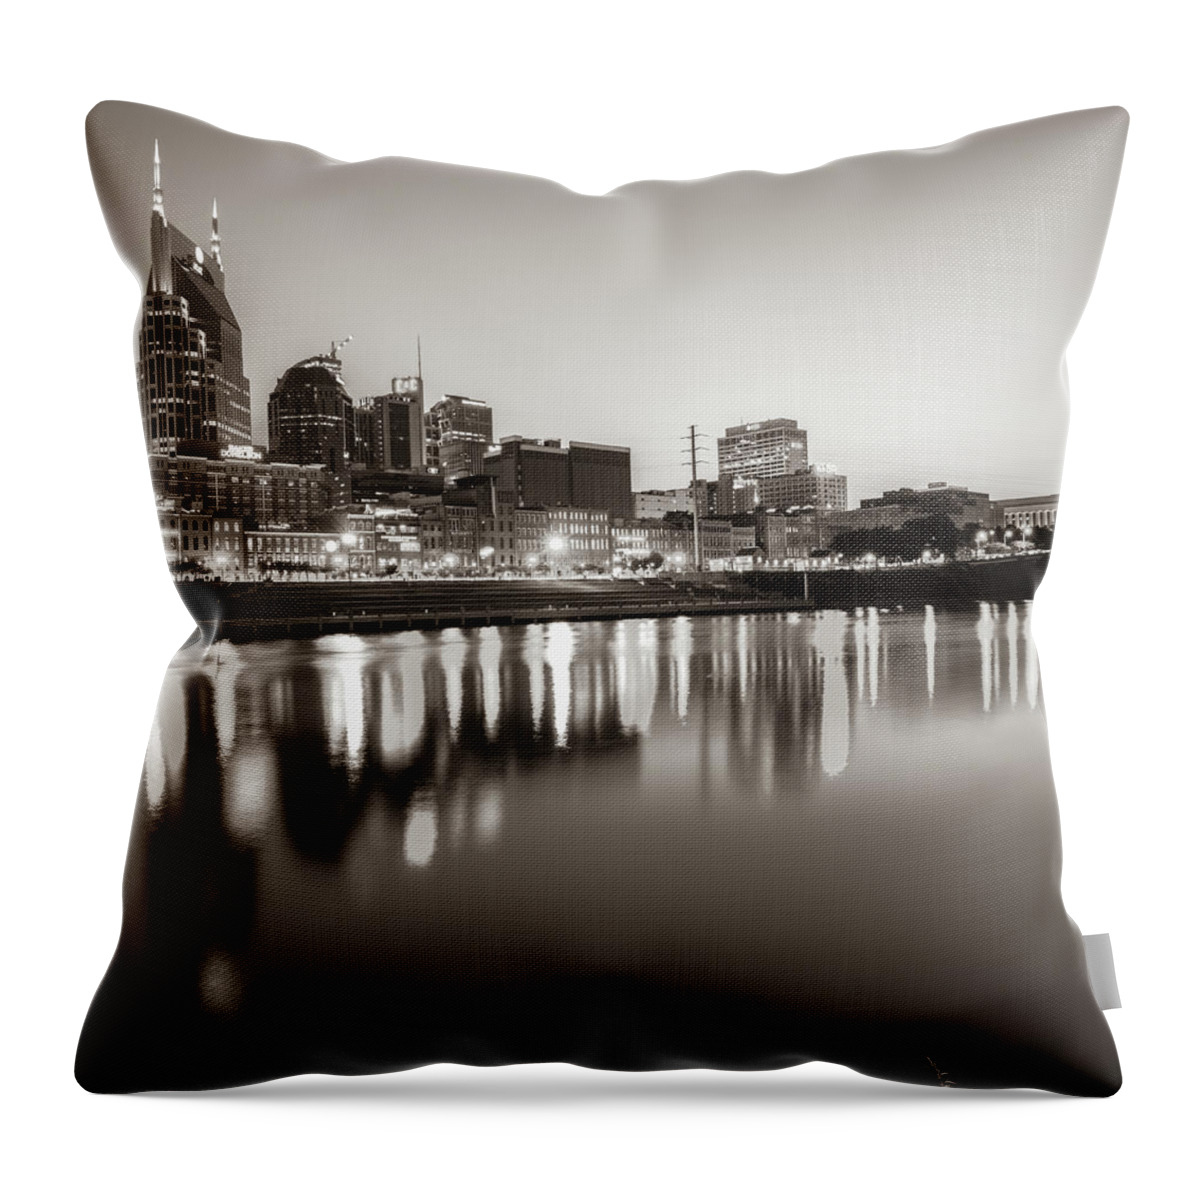 Nashville Skyline Throw Pillow featuring the photograph Nashville Sepia Skyline Reflections - Square Art by Gregory Ballos